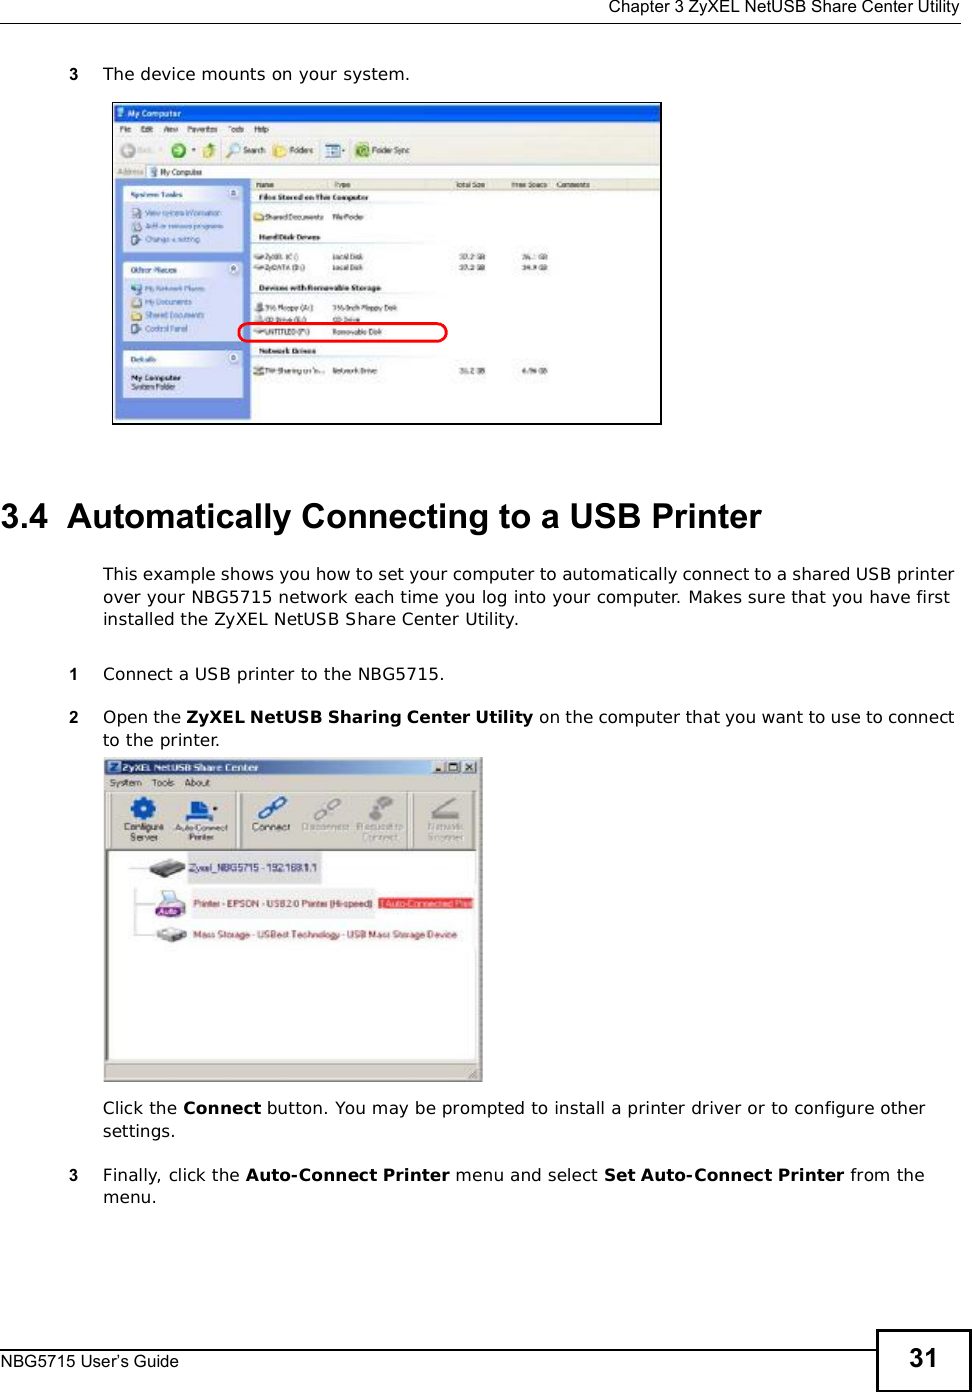  Chapter 3ZyXEL NetUSB Share Center UtilityNBG5715 User’s Guide 313The device mounts on your system.3.4  Automatically Connecting to a USB PrinterThis example shows you how to set your computer to automatically connect to a shared USB printer over your NBG5715 network each time you log into your computer. Makes sure that you have first installed the ZyXEL NetUSB Share Center Utility.1Connect a USB printer to the NBG5715. 2Open the ZyXEL NetUSB Sharing Center Utility on the computer that you want to use to connect to the printer.Click the Connect button. You may be prompted to install a printer driver or to configure other settings.3Finally, click the Auto-ConnectPrinter menu and select Set Auto-Connect Printer from the menu.